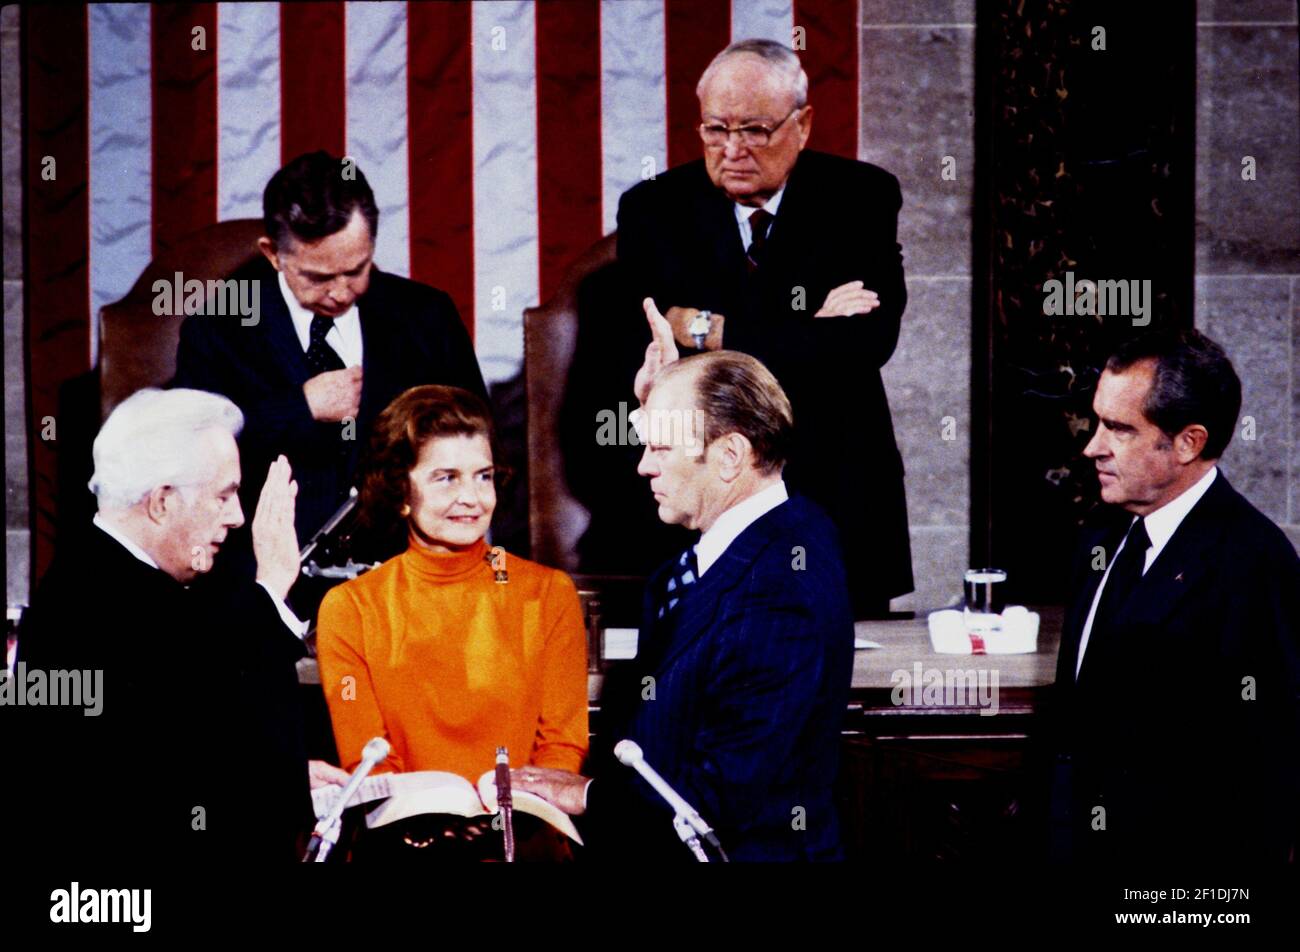 Gerald Ford takes the oath of office as Vice President, in a ceremony ...